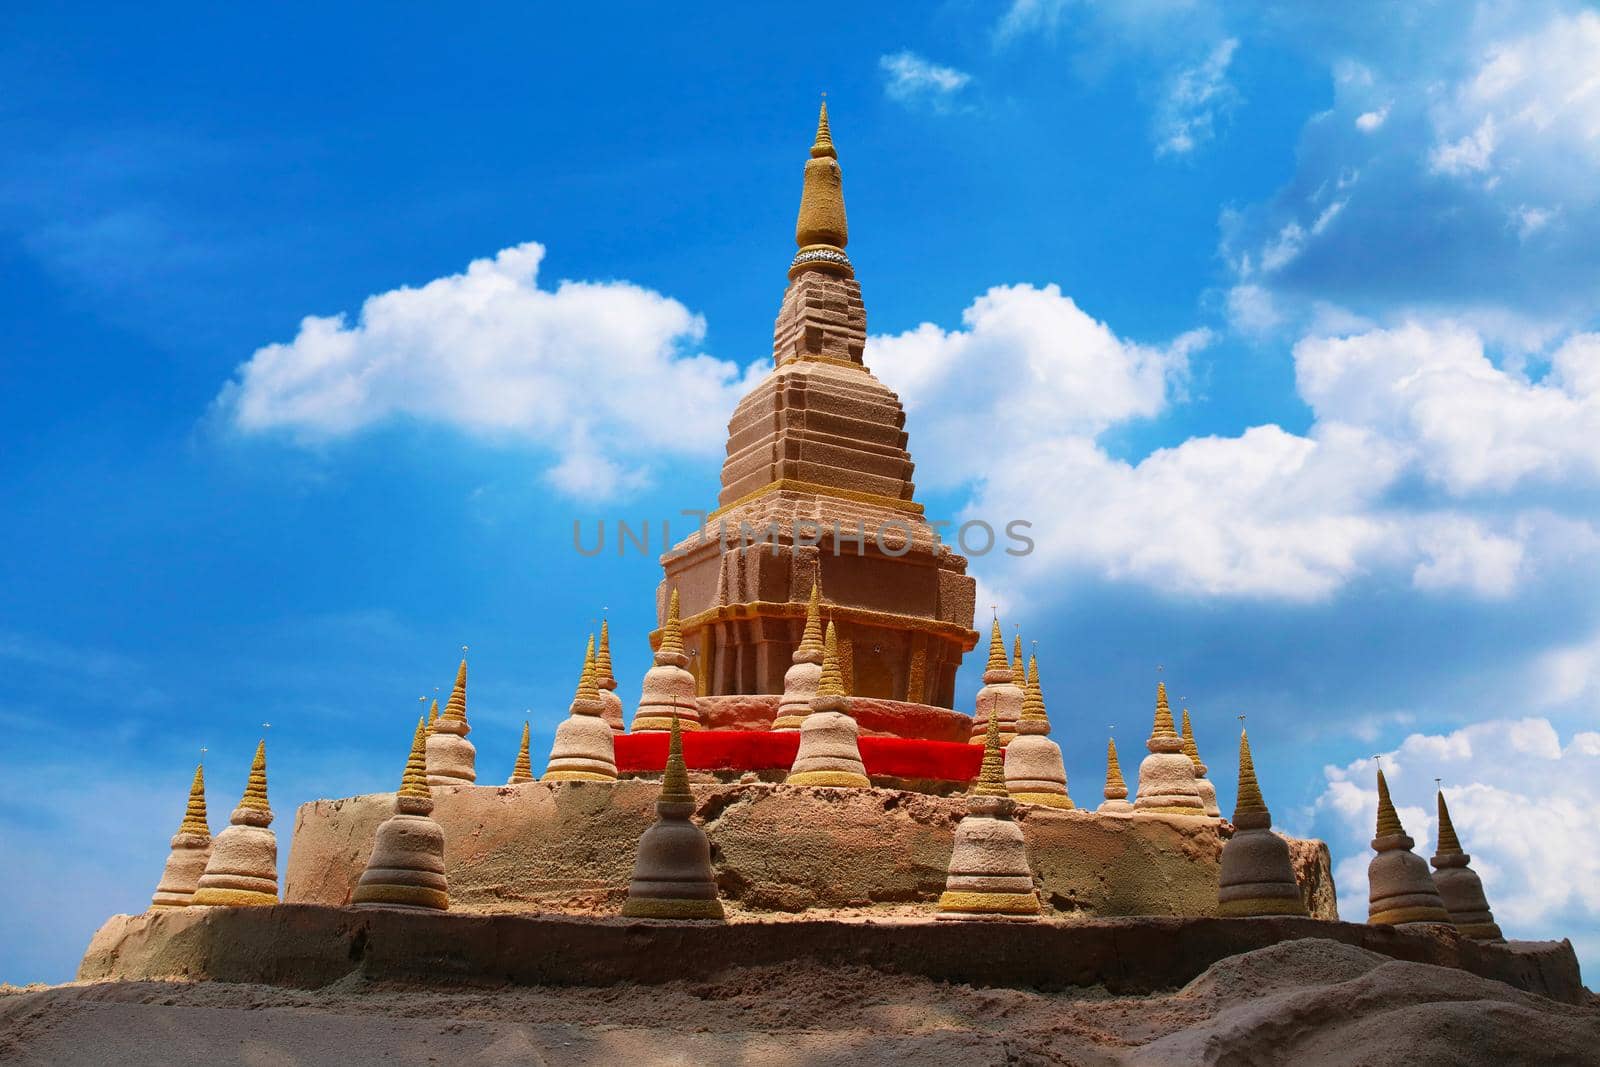 Big and little sand pagoda was carefully built, and beautifully decorated Songkran festival